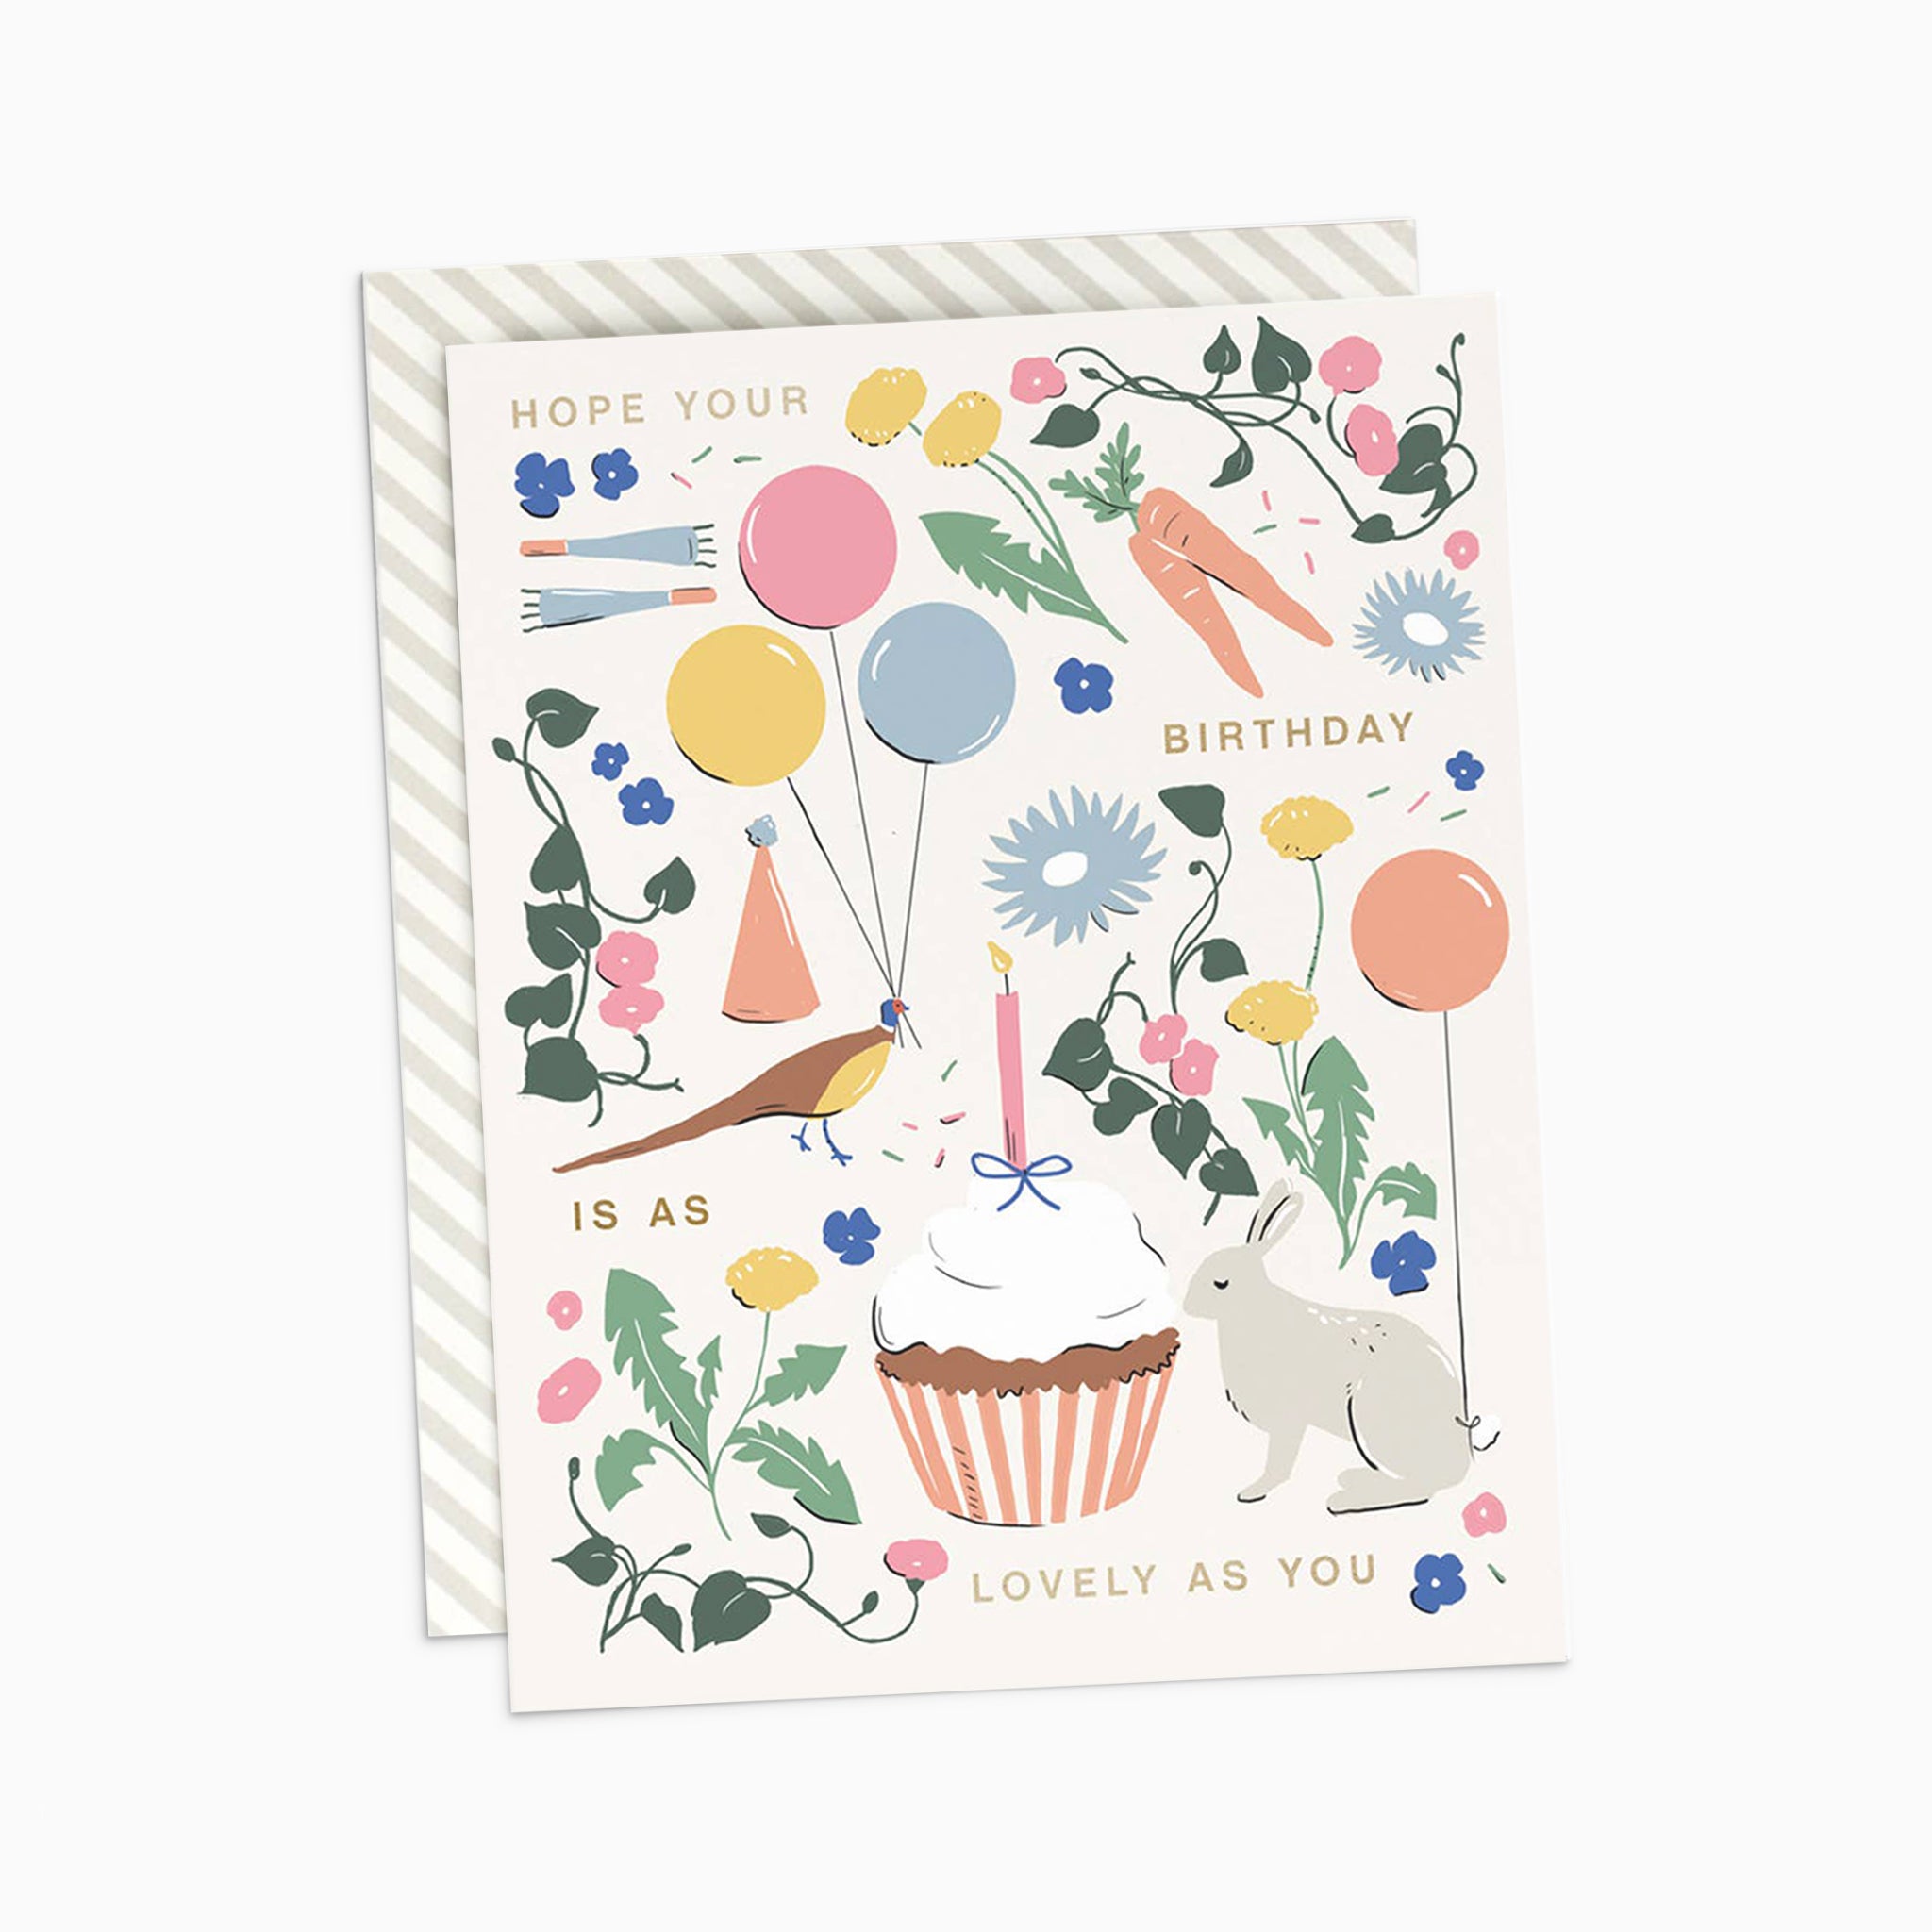 Illustrated 'As Lovely As You' Birthday Card featuring a vibrant mix of cupcakes, balloons, and garden florals on warm white cover cardstock, perfect for celebrating someone special.